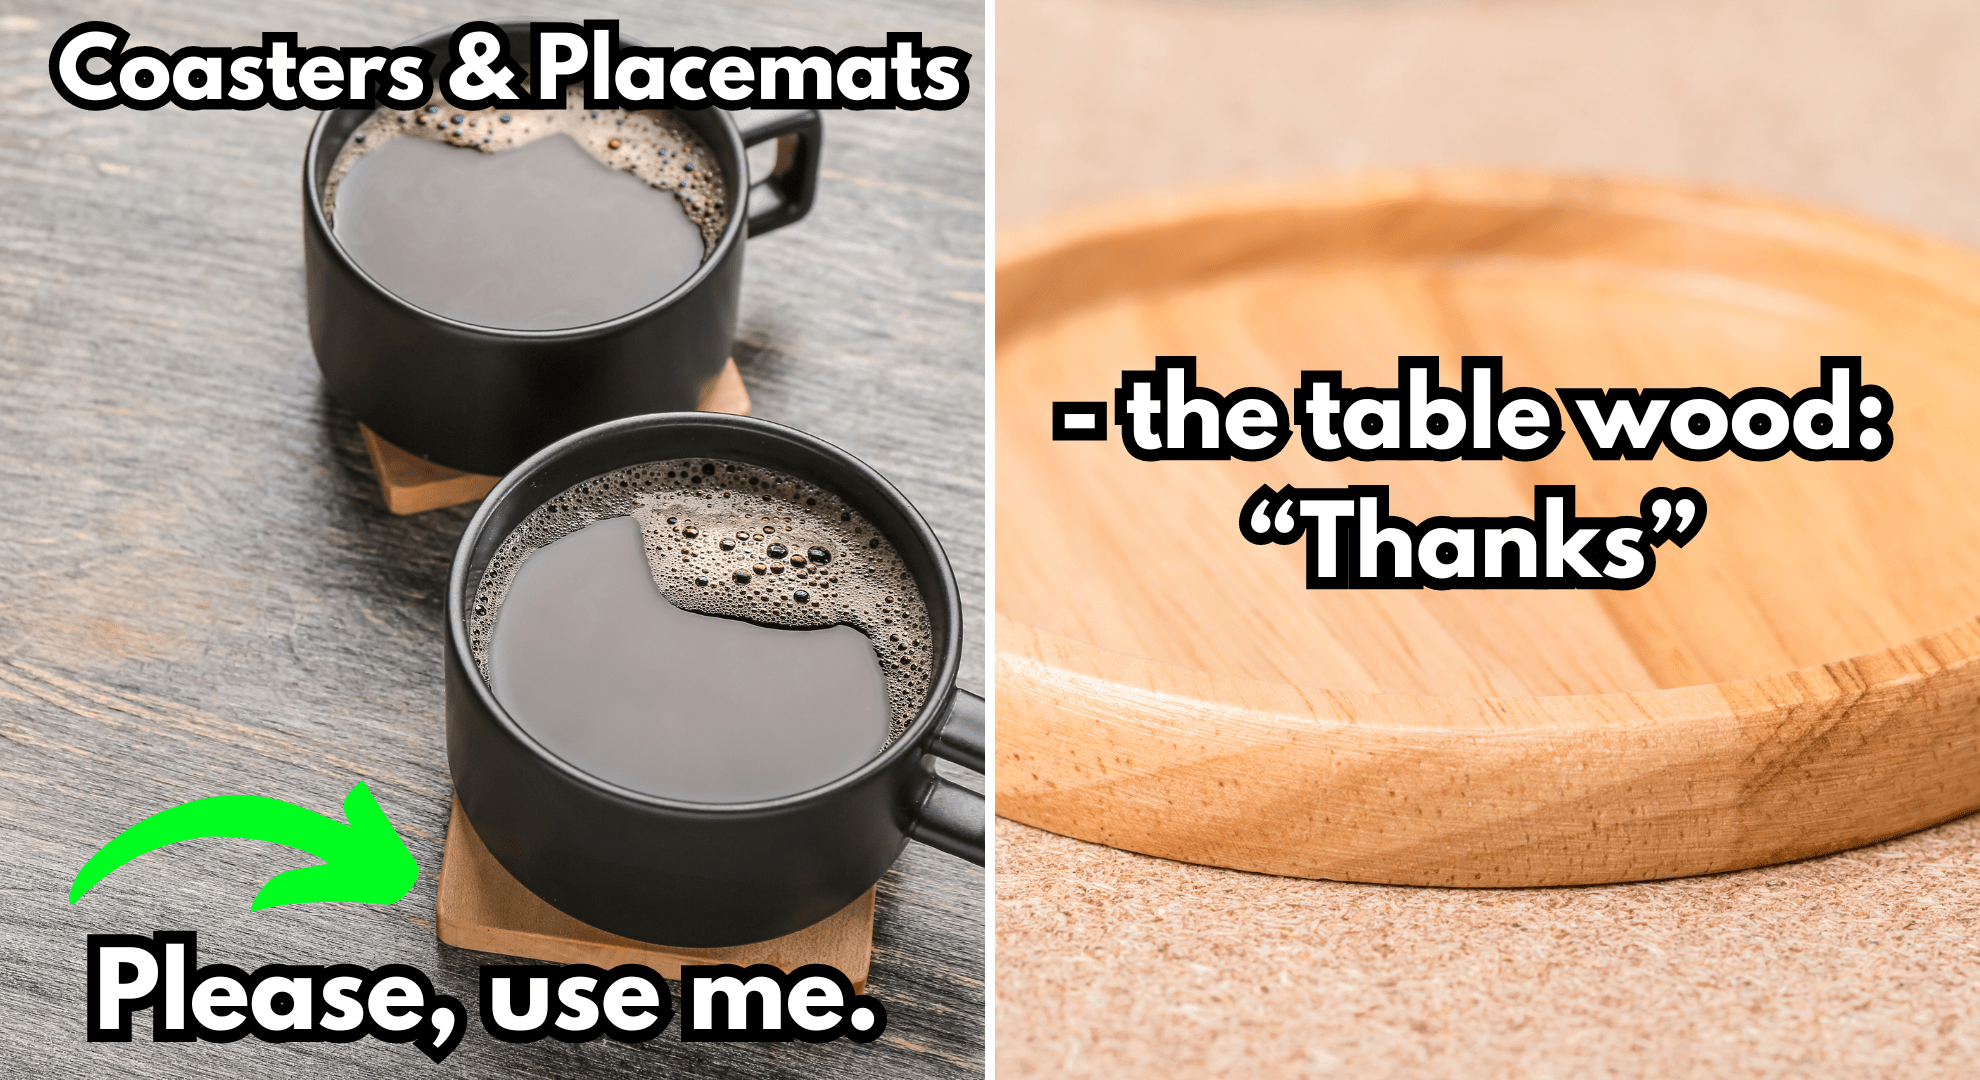 Coasters & Placemats to table wood to avoid staining water damage